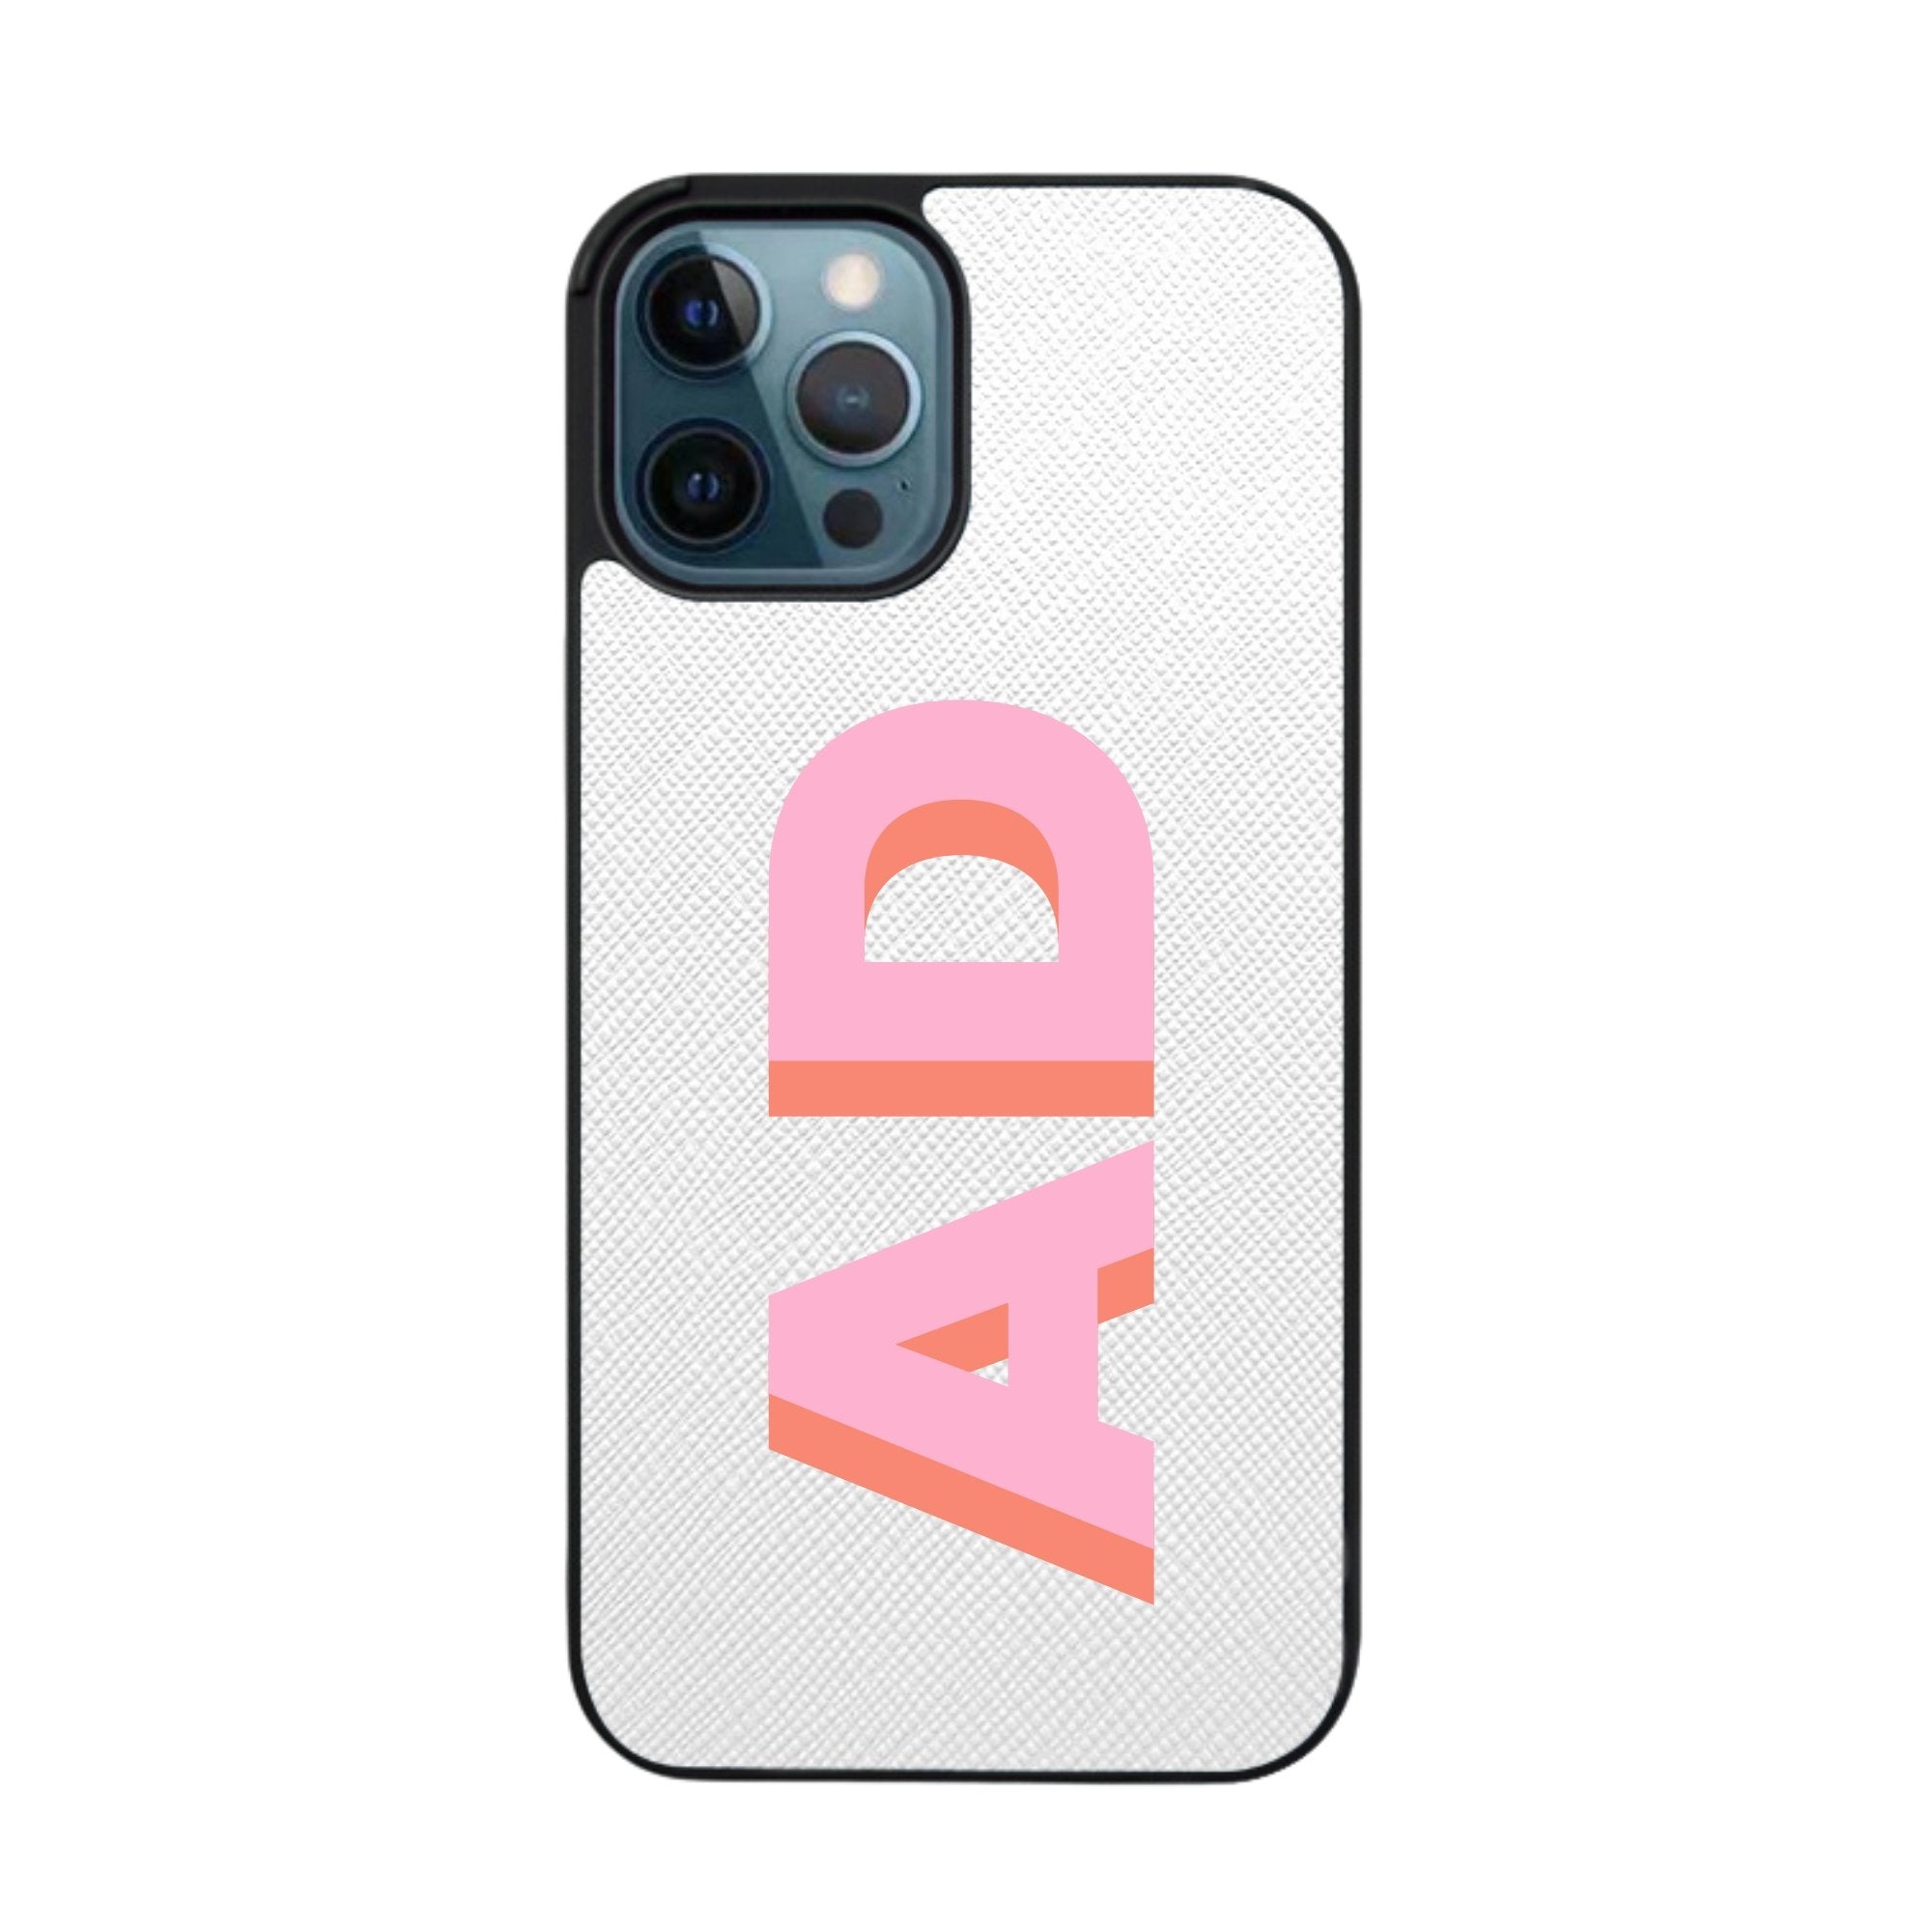 Shadow Monogram Leather Phone Case - Sprinkled With Pink #bachelorette #custom #gifts